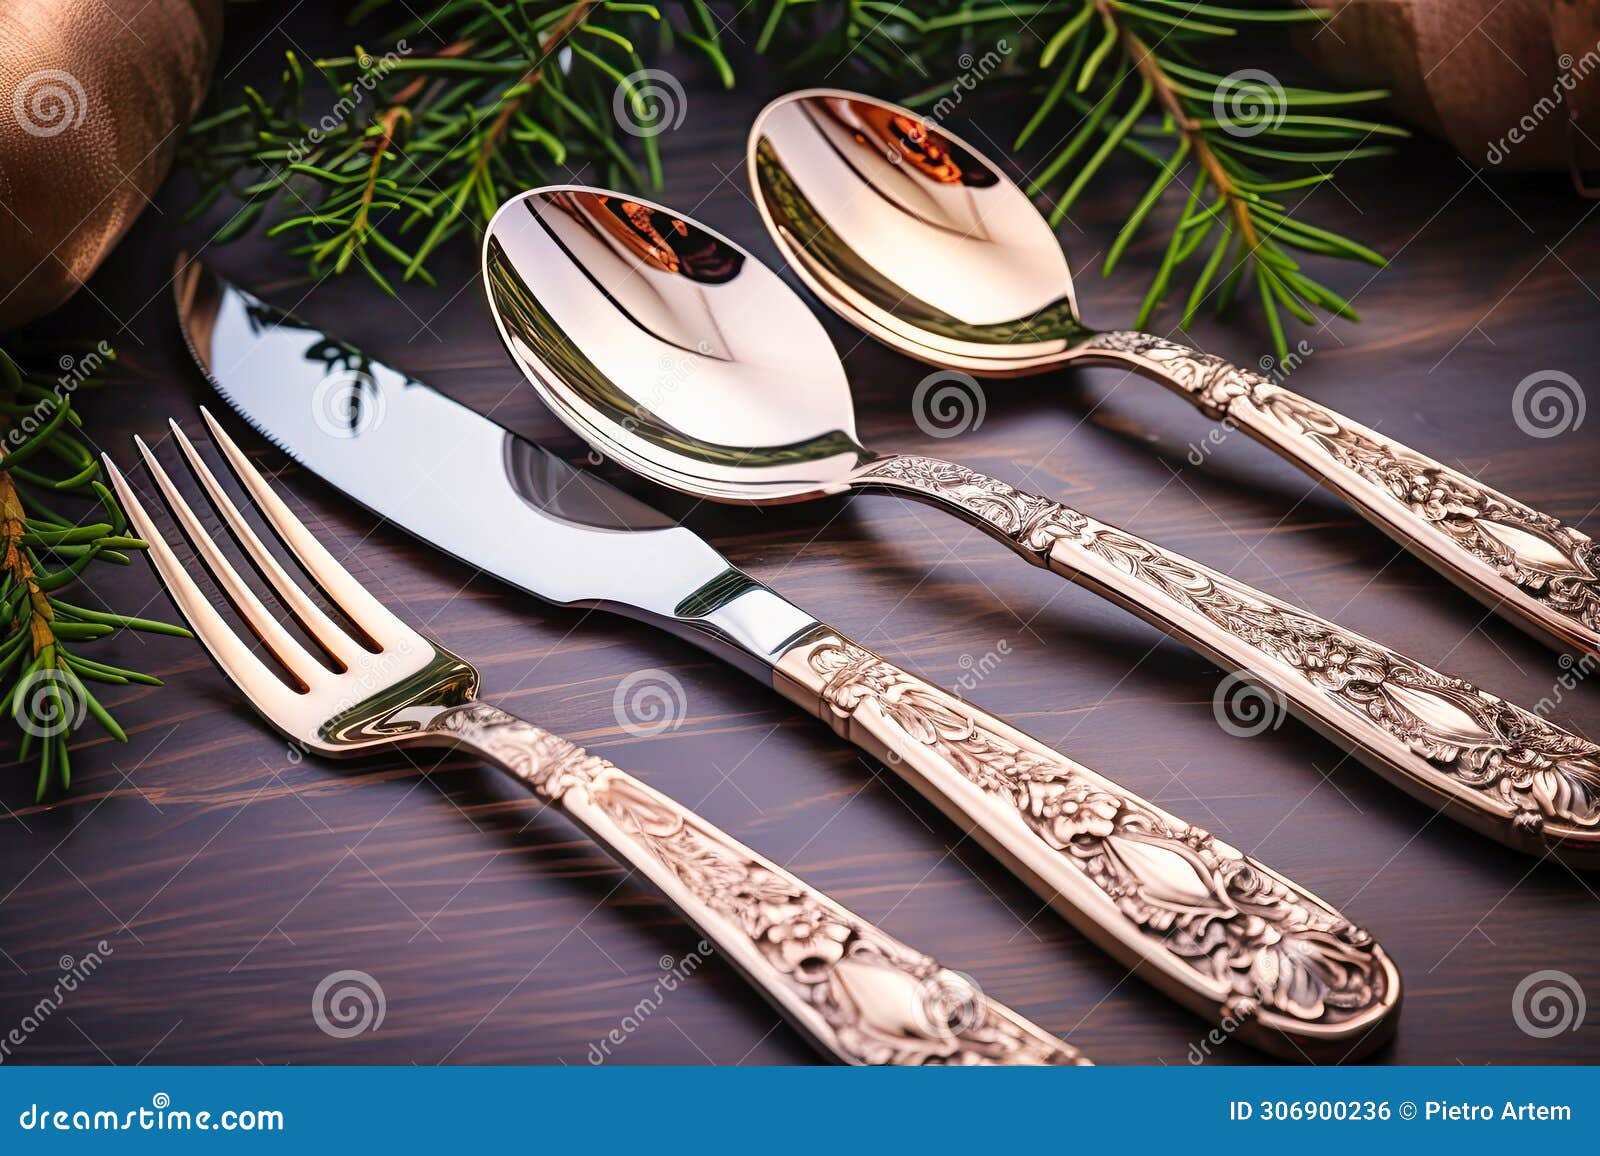 new year festiv table sets. fork spoon knife